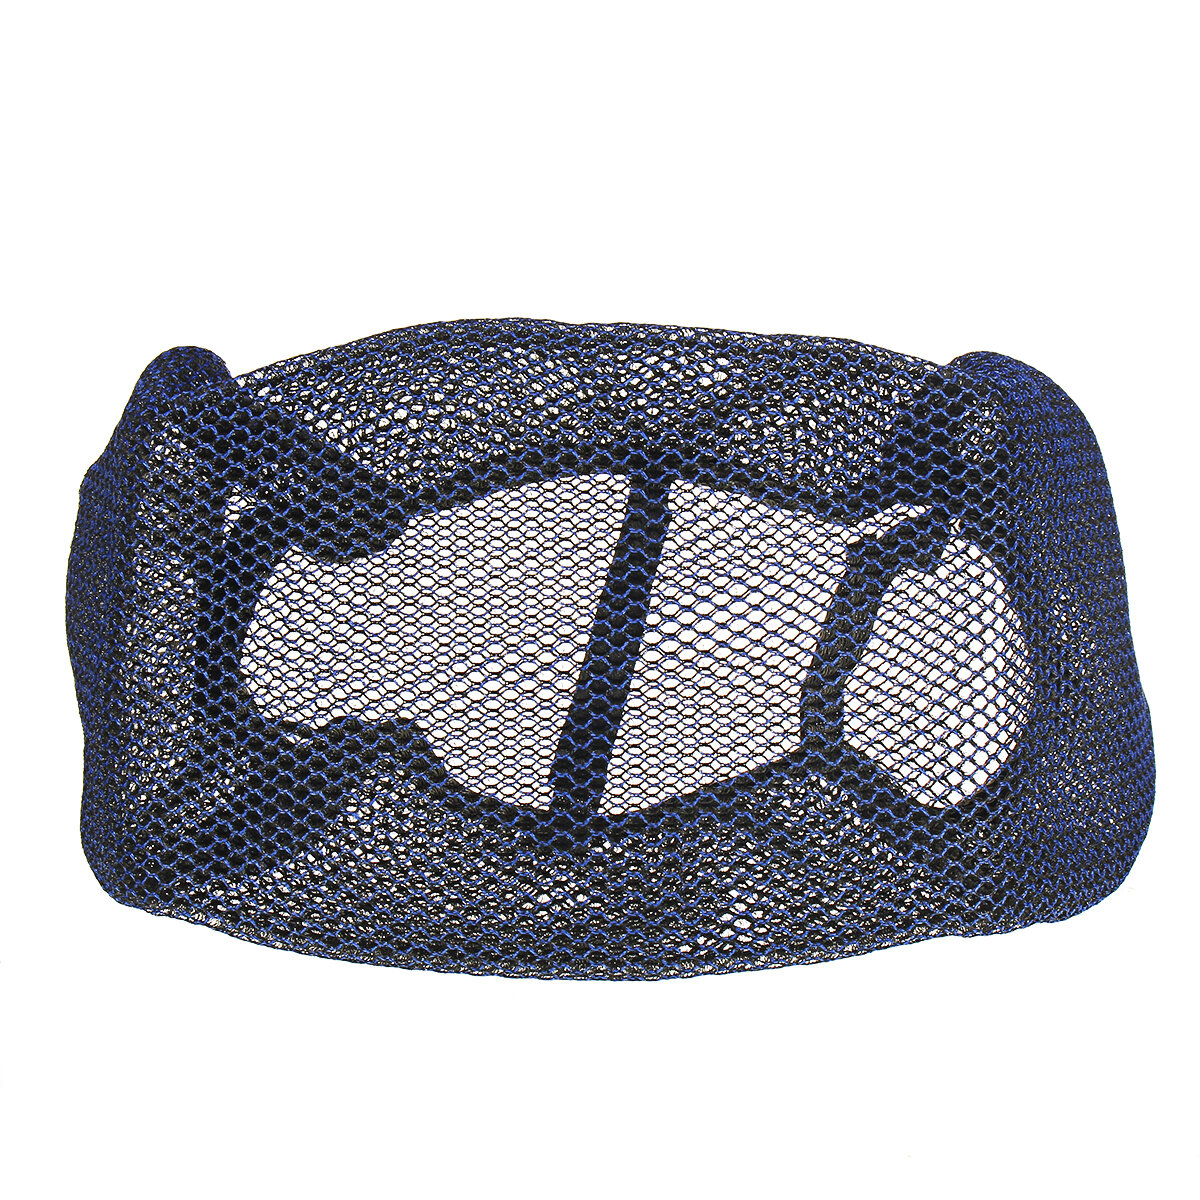 Motorcycle 3D Mesh Seat Cushion Cover Breathable Waterproof Flexible